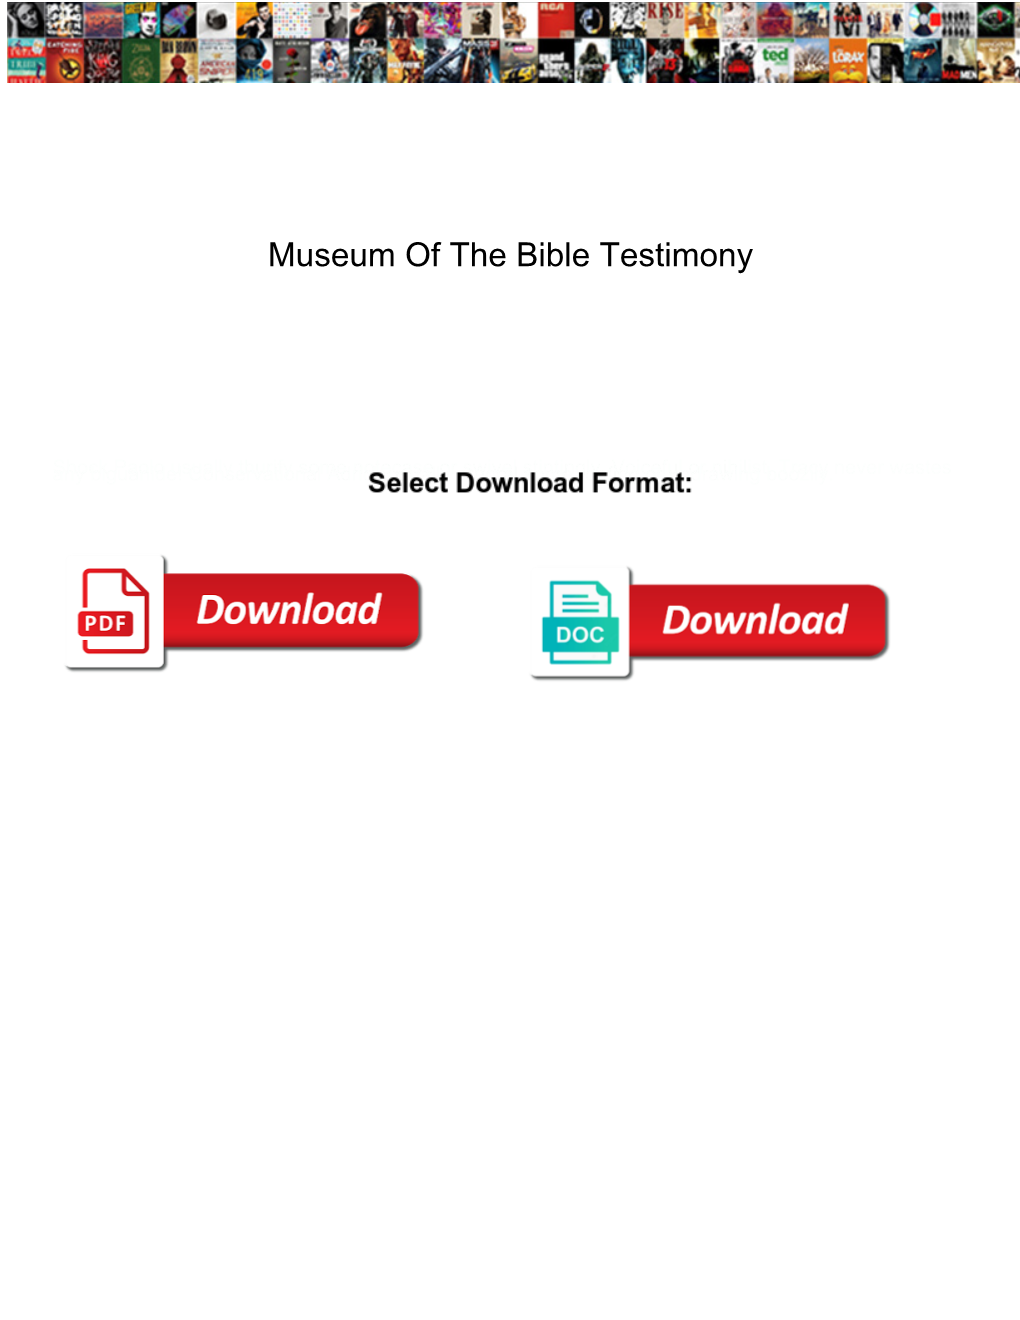 Museum of the Bible Testimony